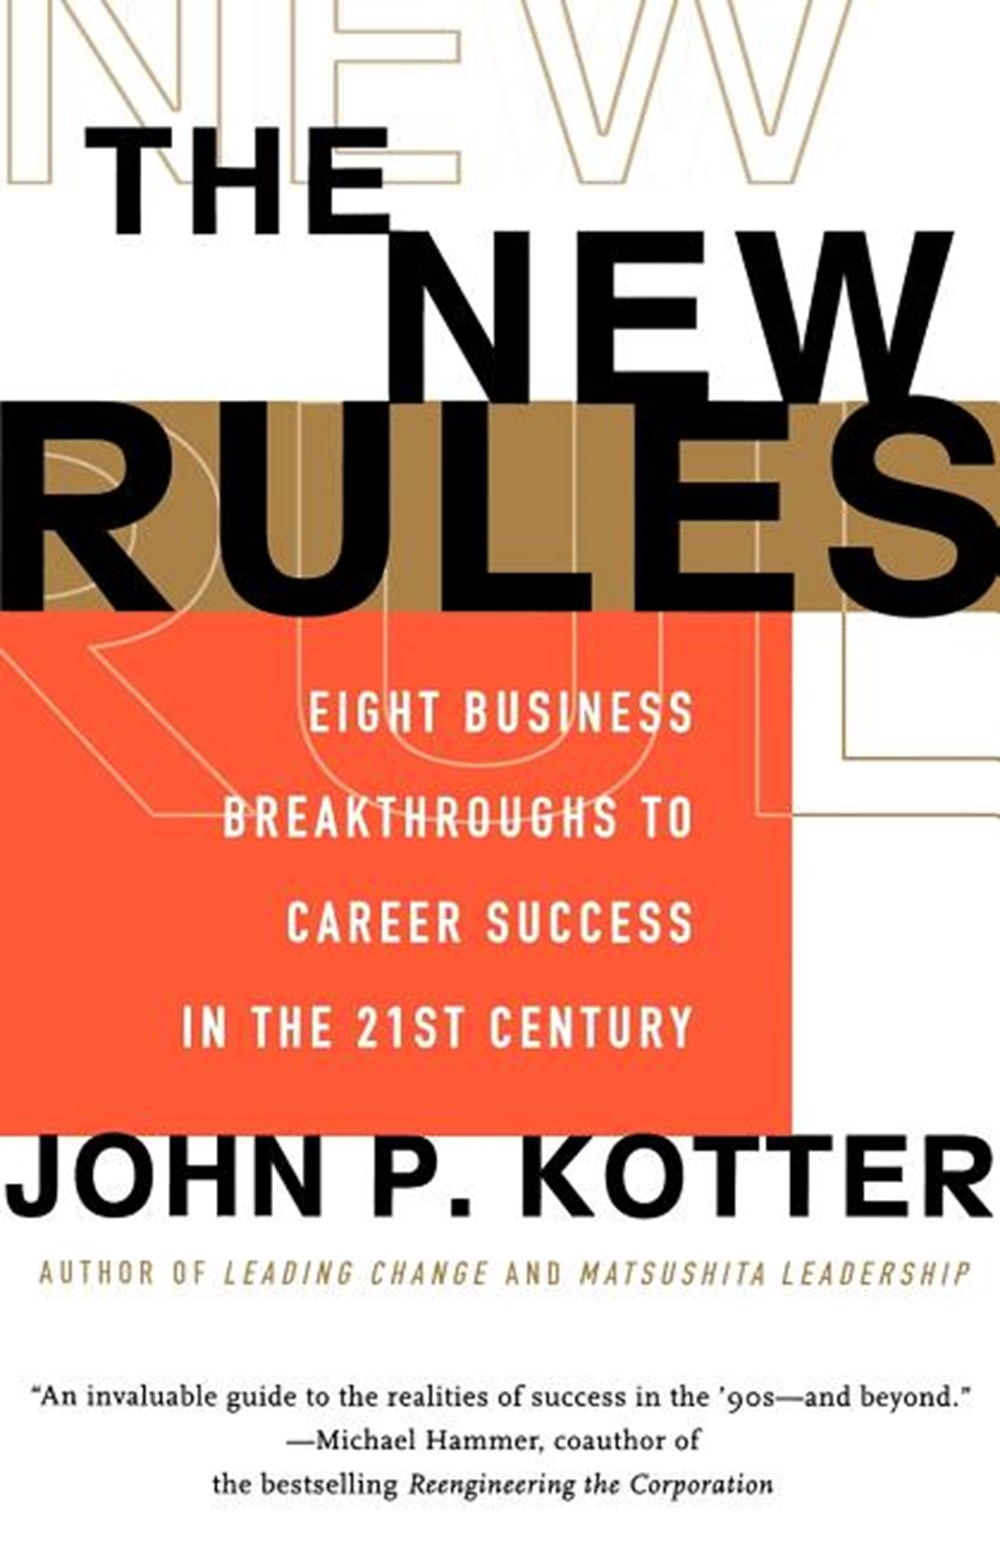 New Rules: Eight Business Breakthroughs to Career Success in the 21st Century